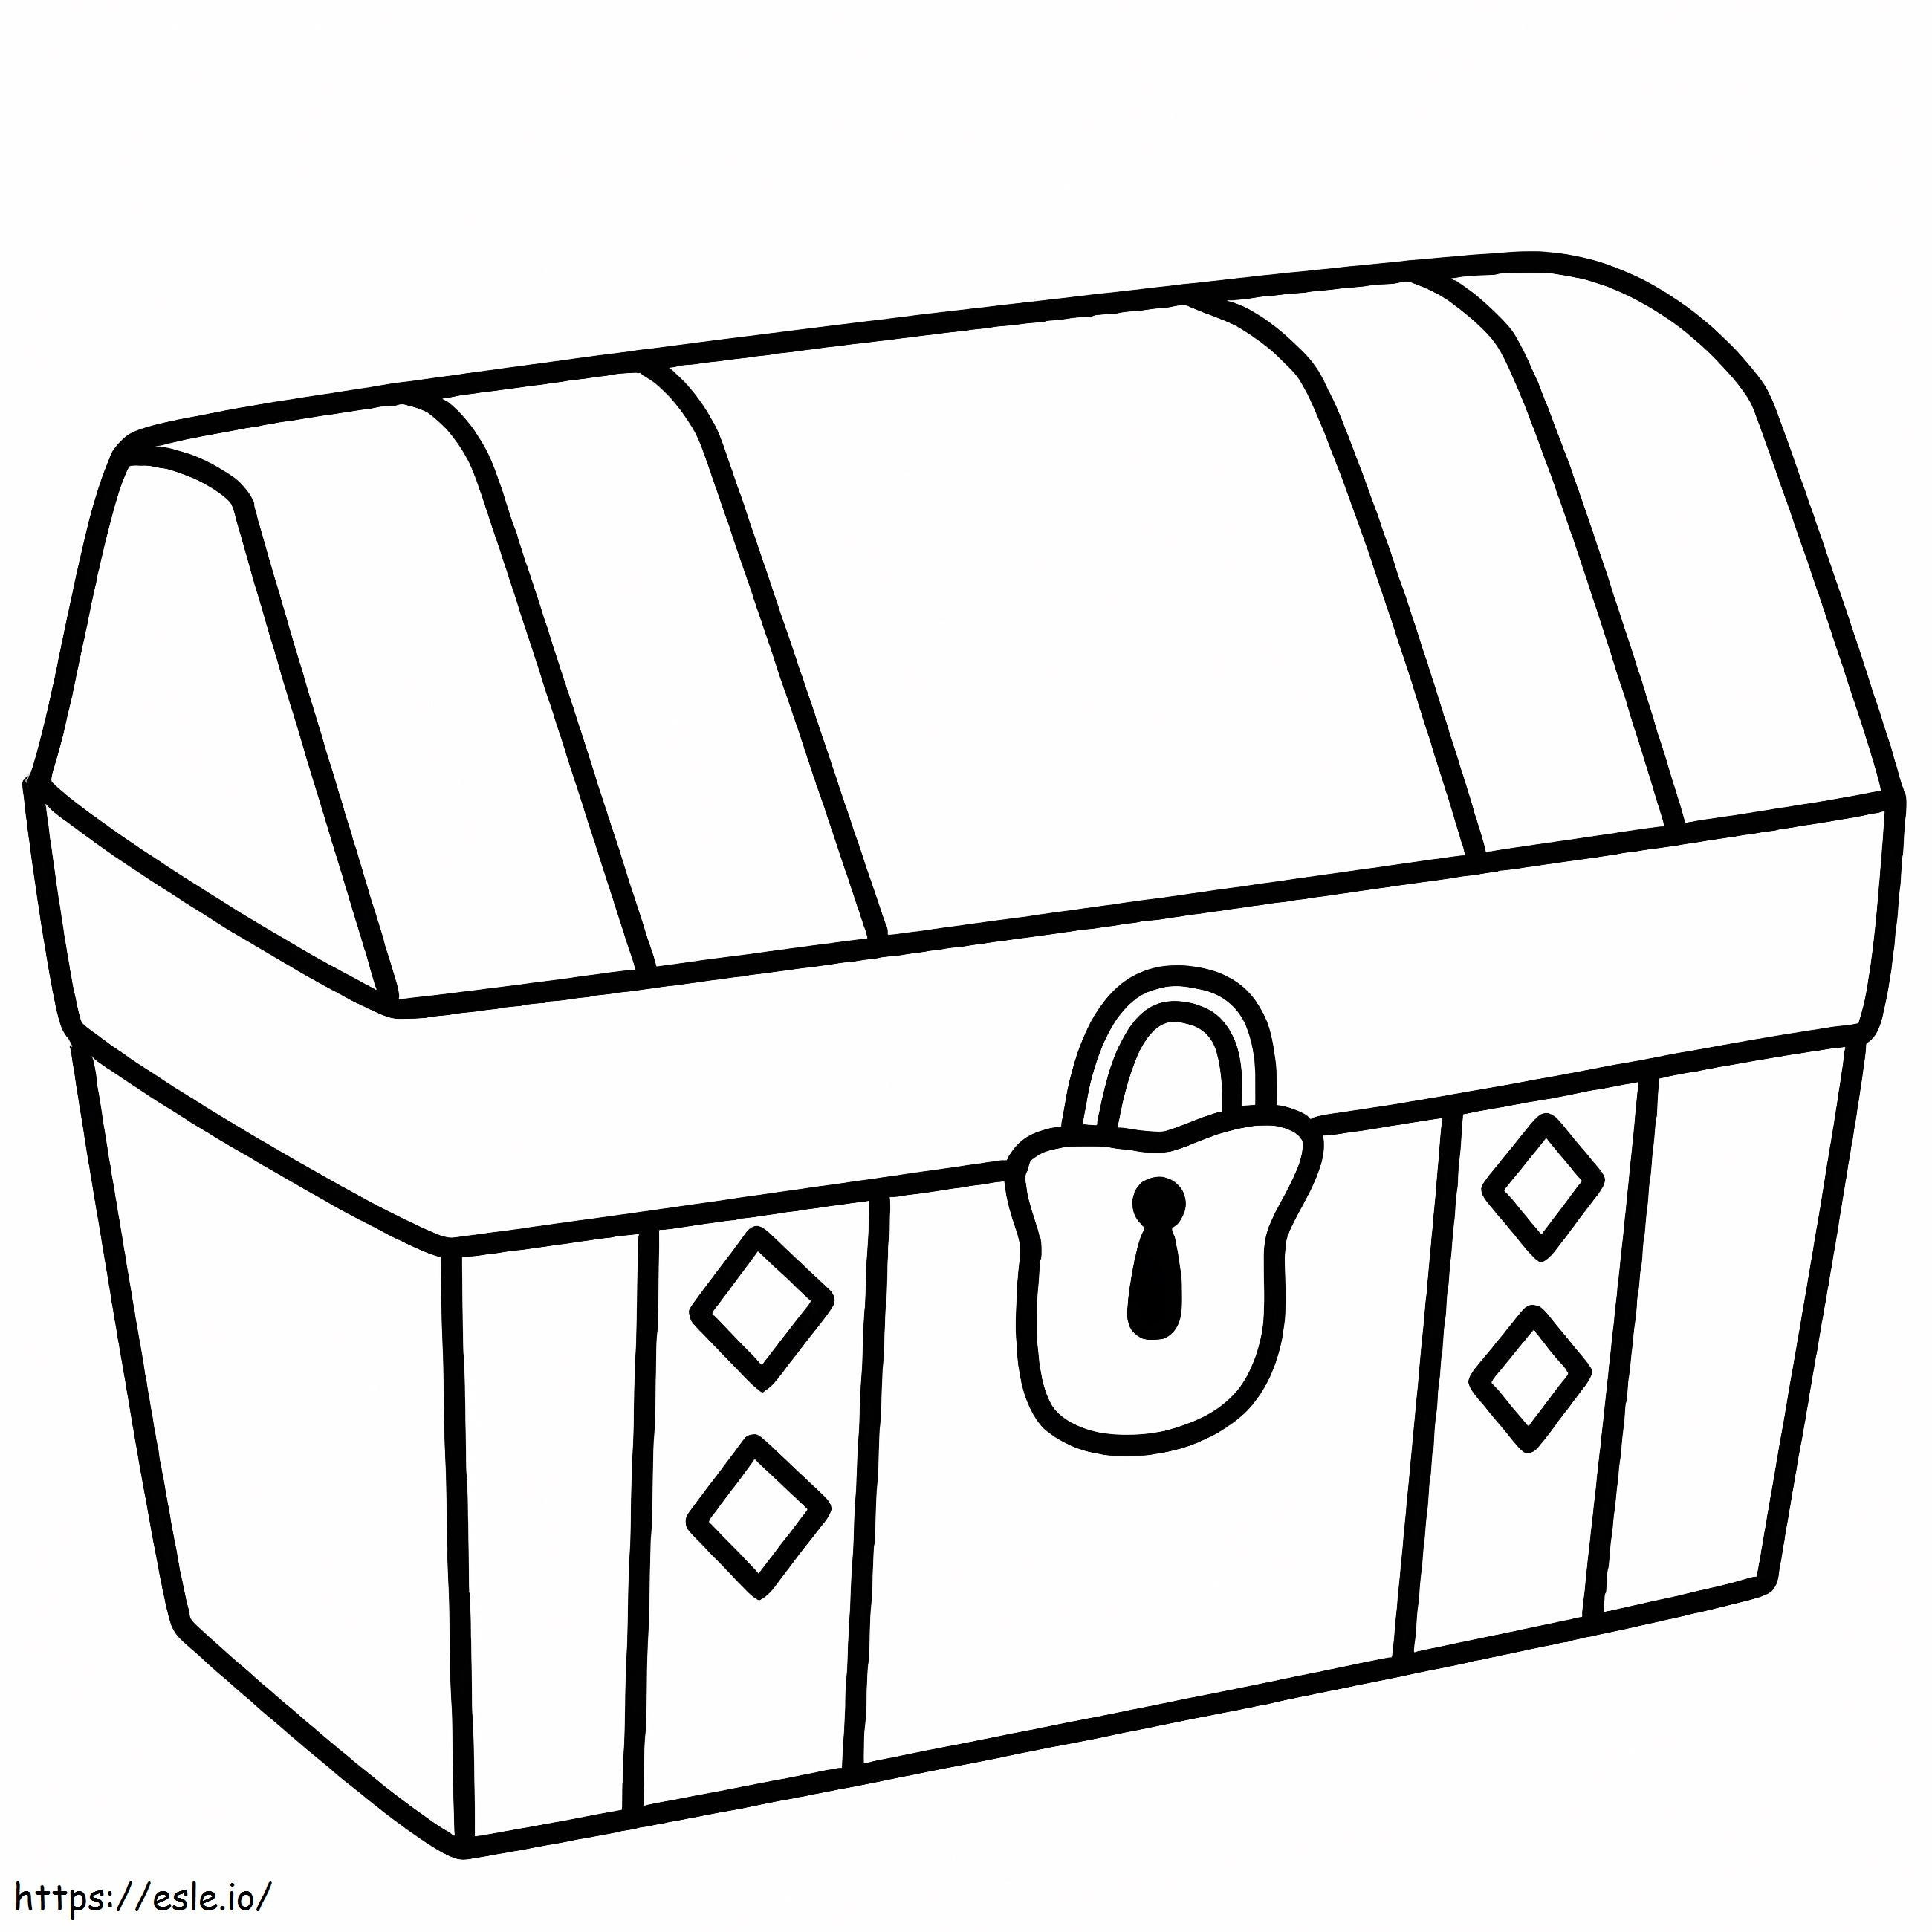 Normal Treasure Chest coloring page